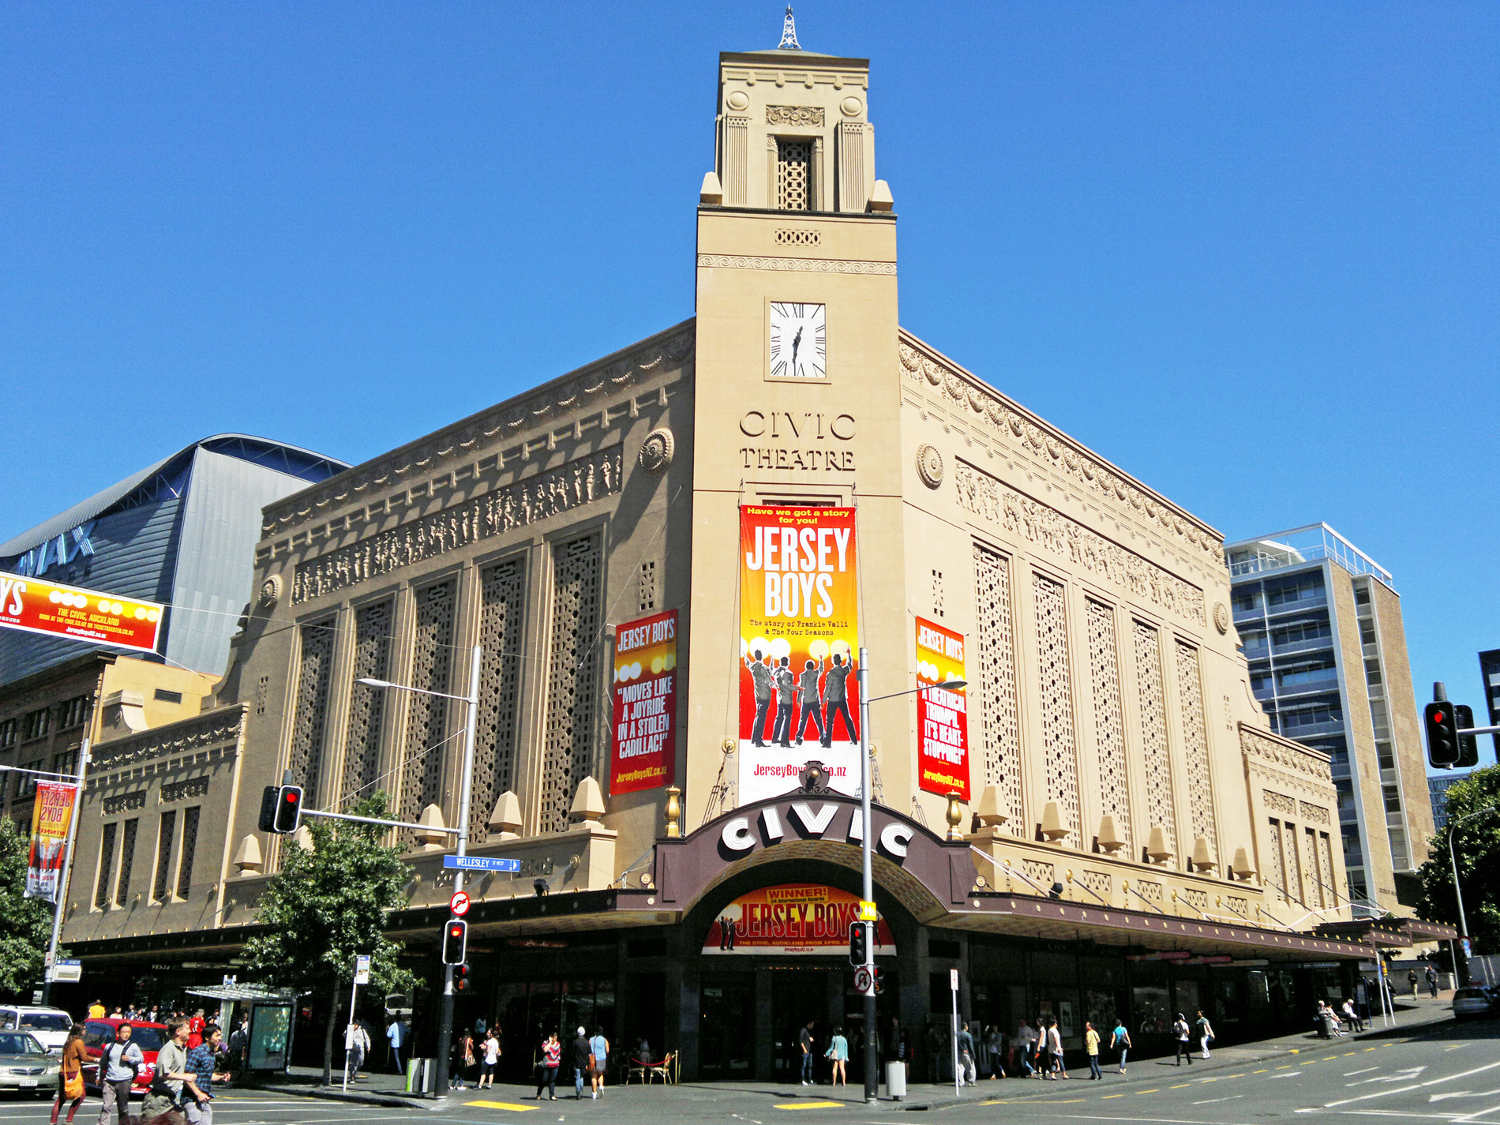 Civic Theatre, Auckland, New Zealand @ChewyPineapple